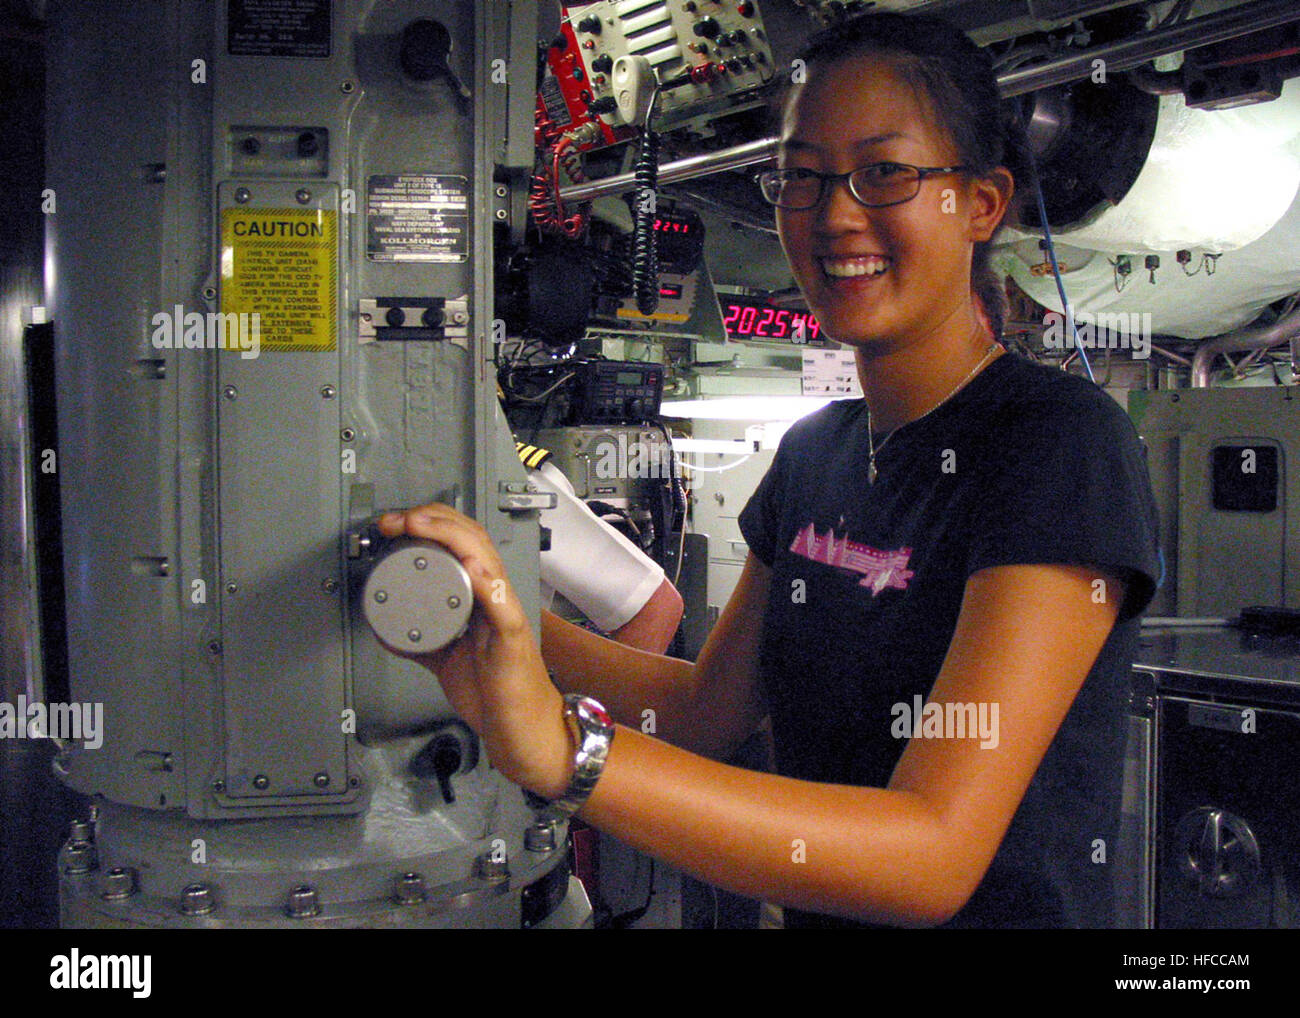 040209-N-0879R-001 Pearl Harbor, Hawaii (Feb 9, 2004) - Hawaii teenage golf star, Michelle Wie, met with Sailors and toured the nuclear-powered attack submarine USS Honolulu (SSN 718) with her parents and friends. The tour ended with lunch in the officerÕs wardroom with the shipÕs Commanding Officer, Cmdr. Charles Harris. U.S. Navy photo by Chief Journalist David Rush. (RELEASED) Michelle Wie visits the bridge of the USS Honolulu Stock Photo